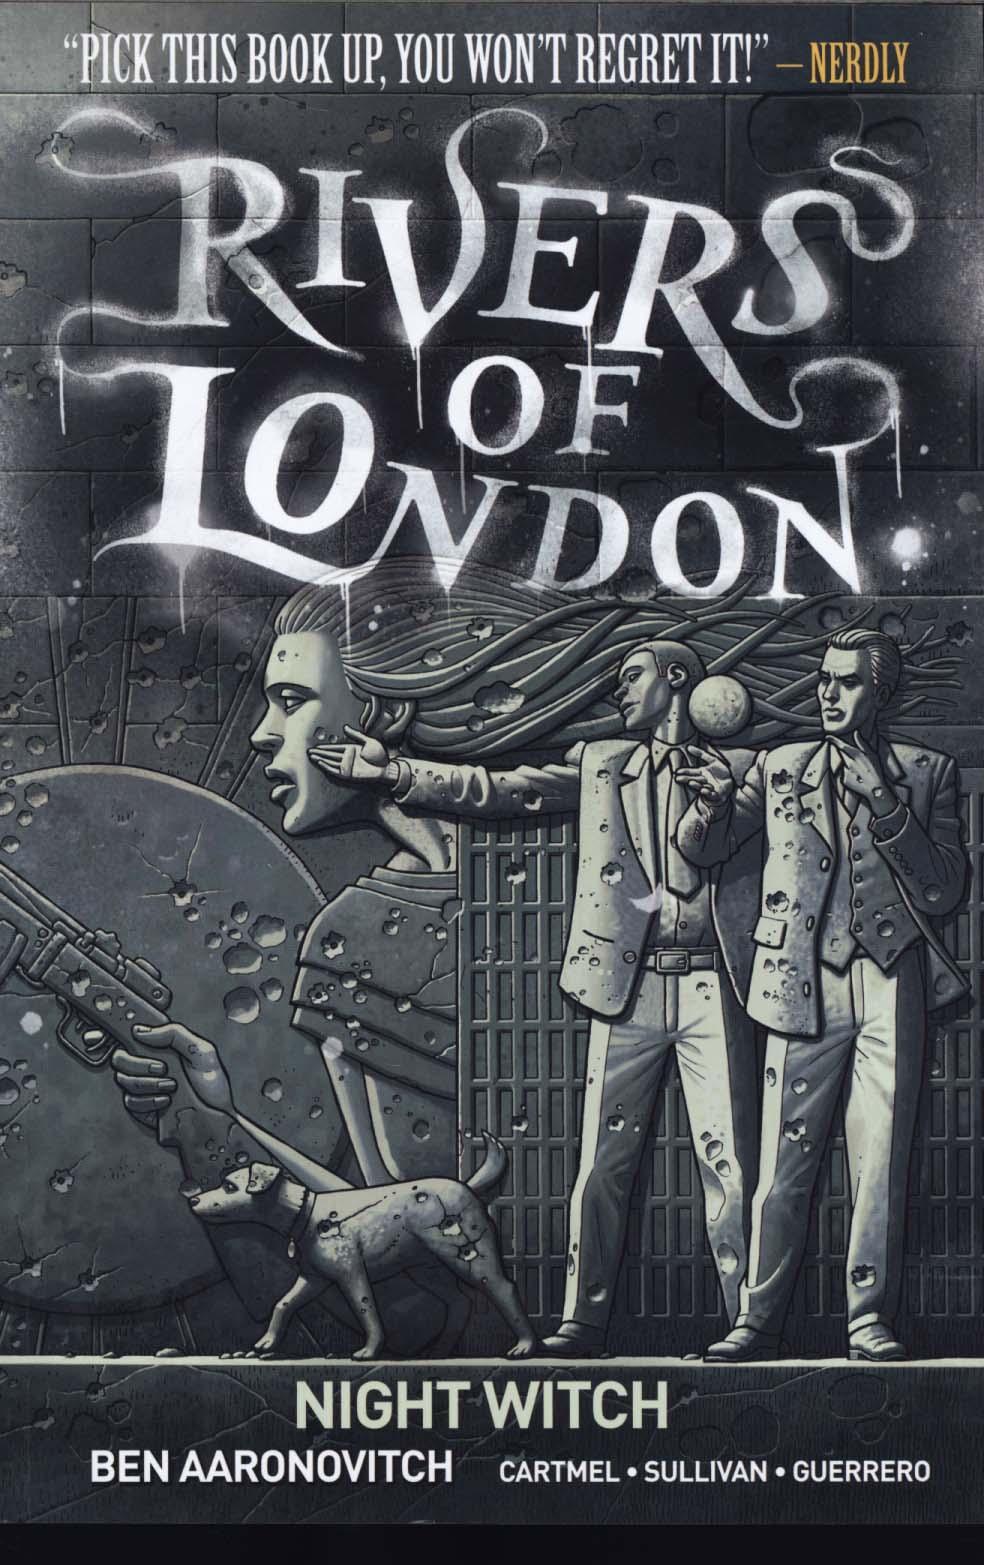 Rivers of London 2: Night Witch